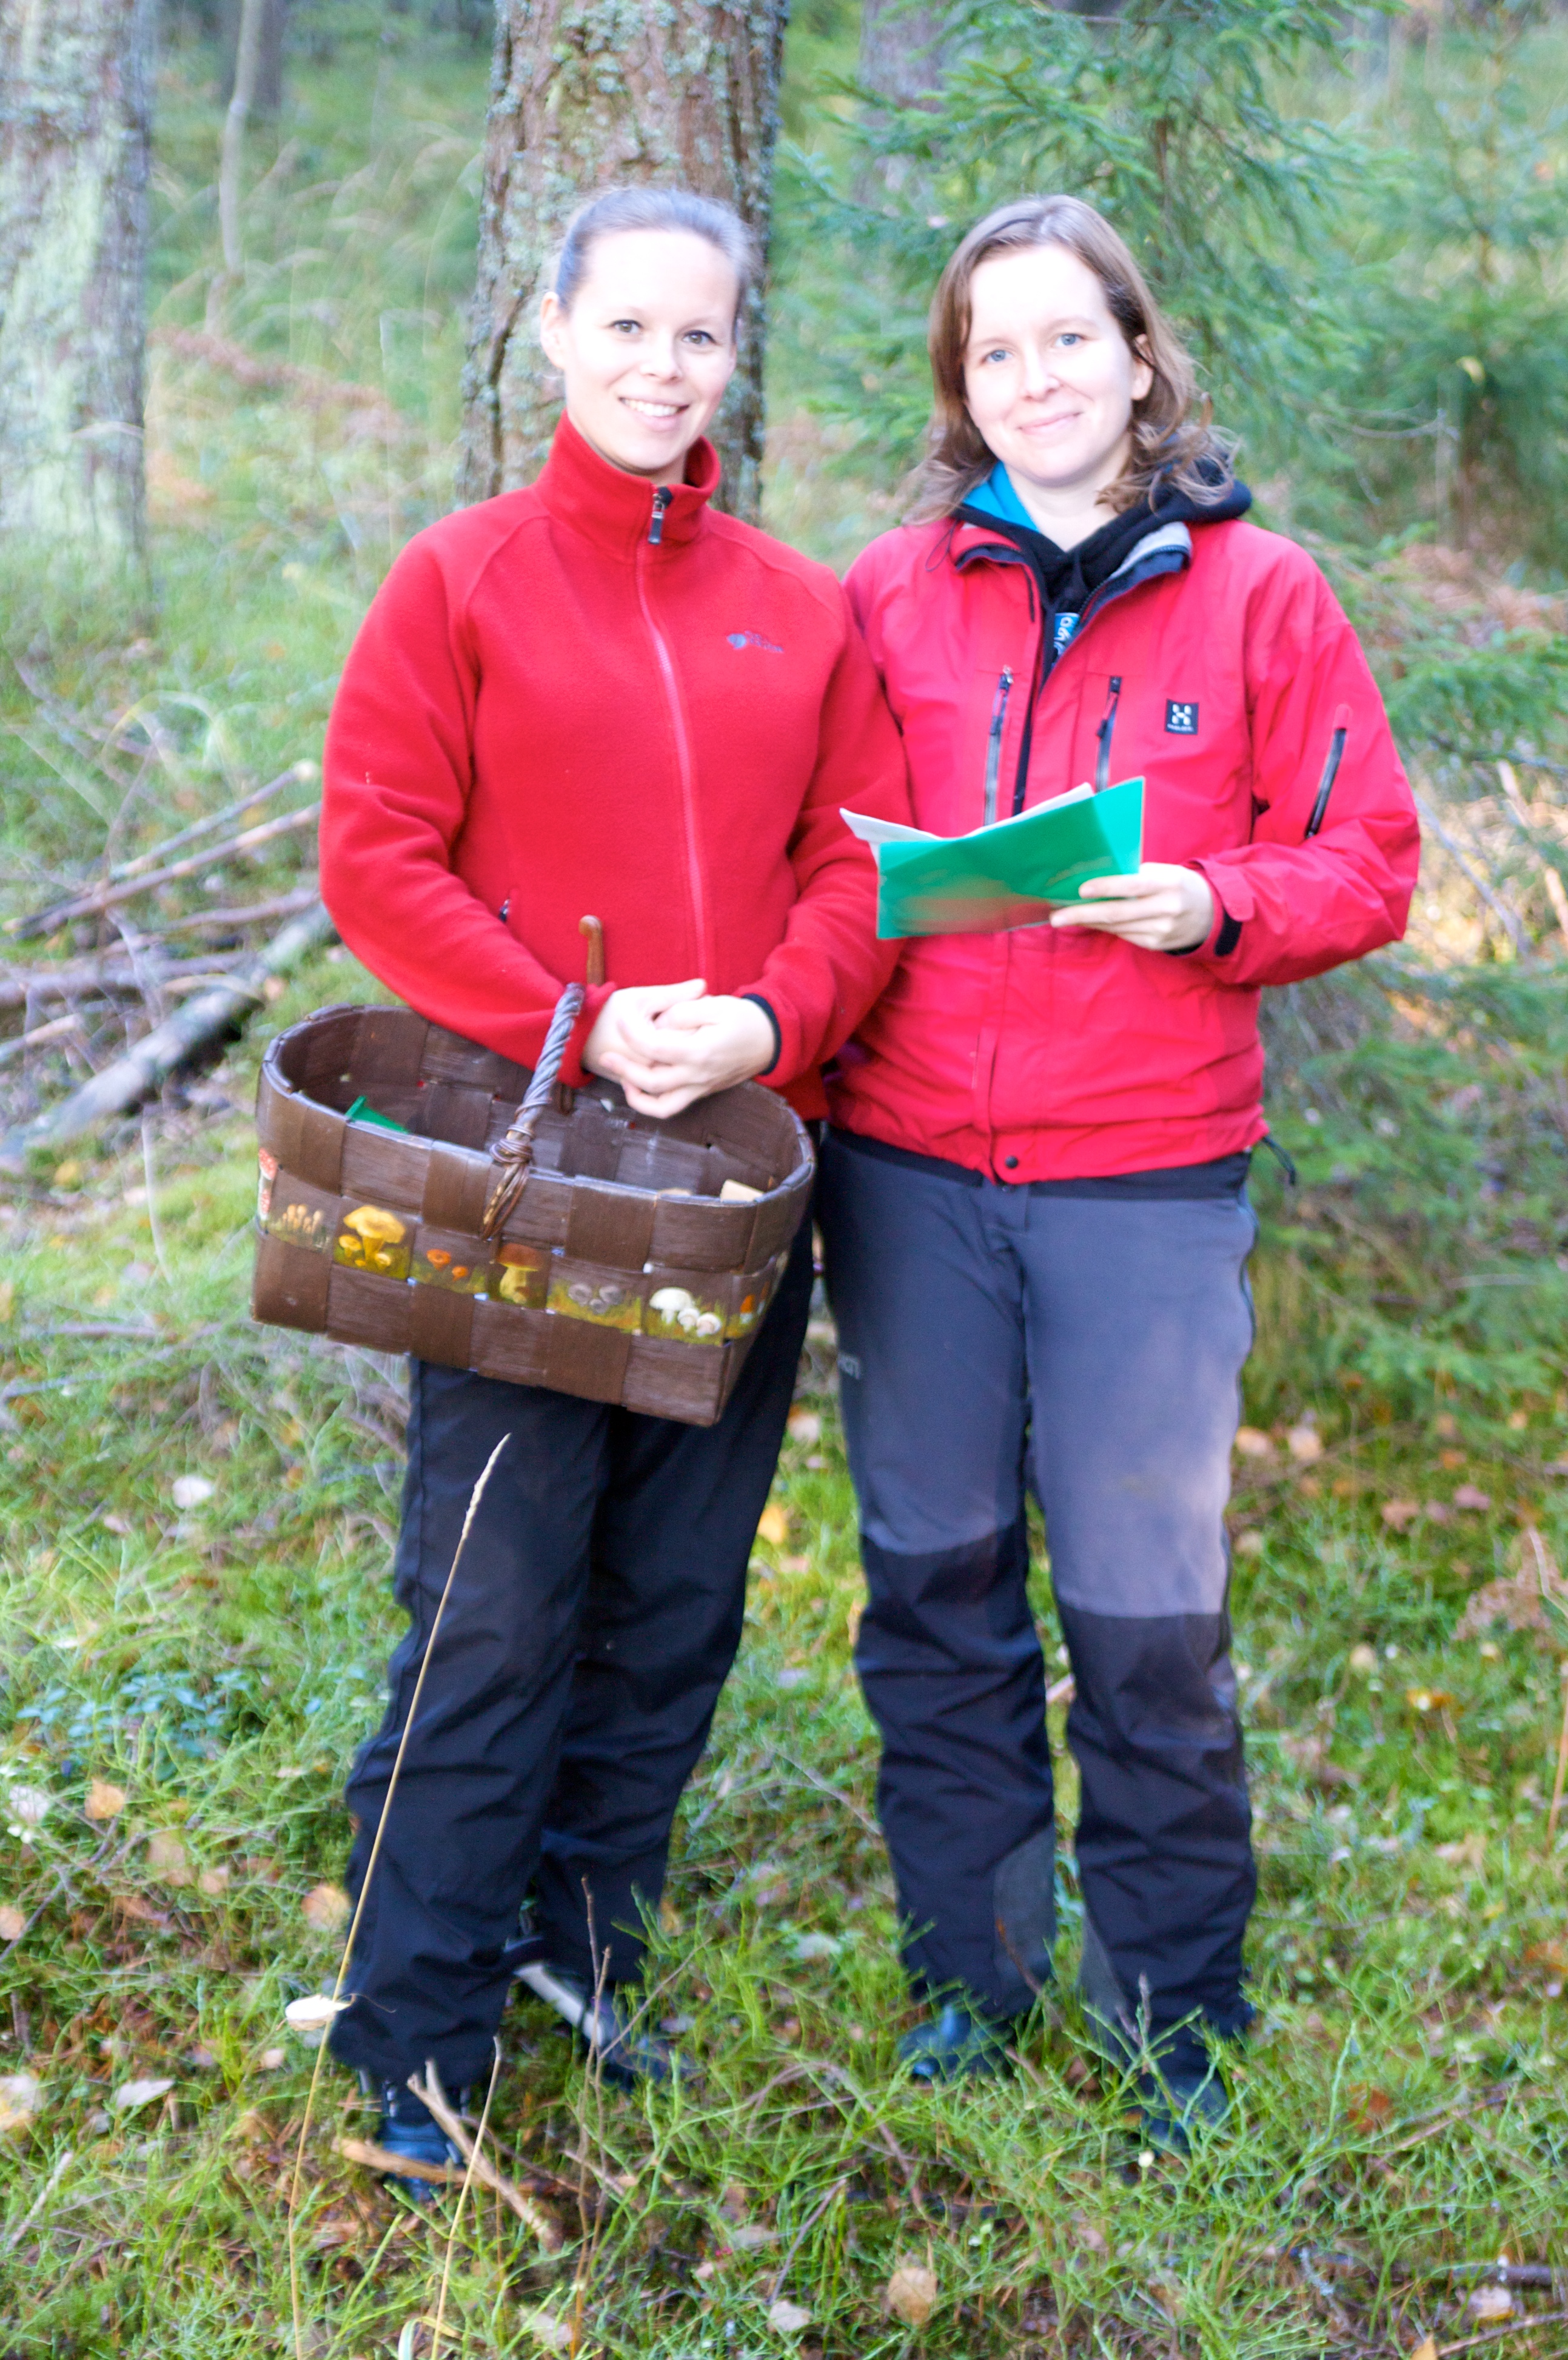 Tuula Niskanen (with basket) and Aino Juslén in Mariefred Forest 